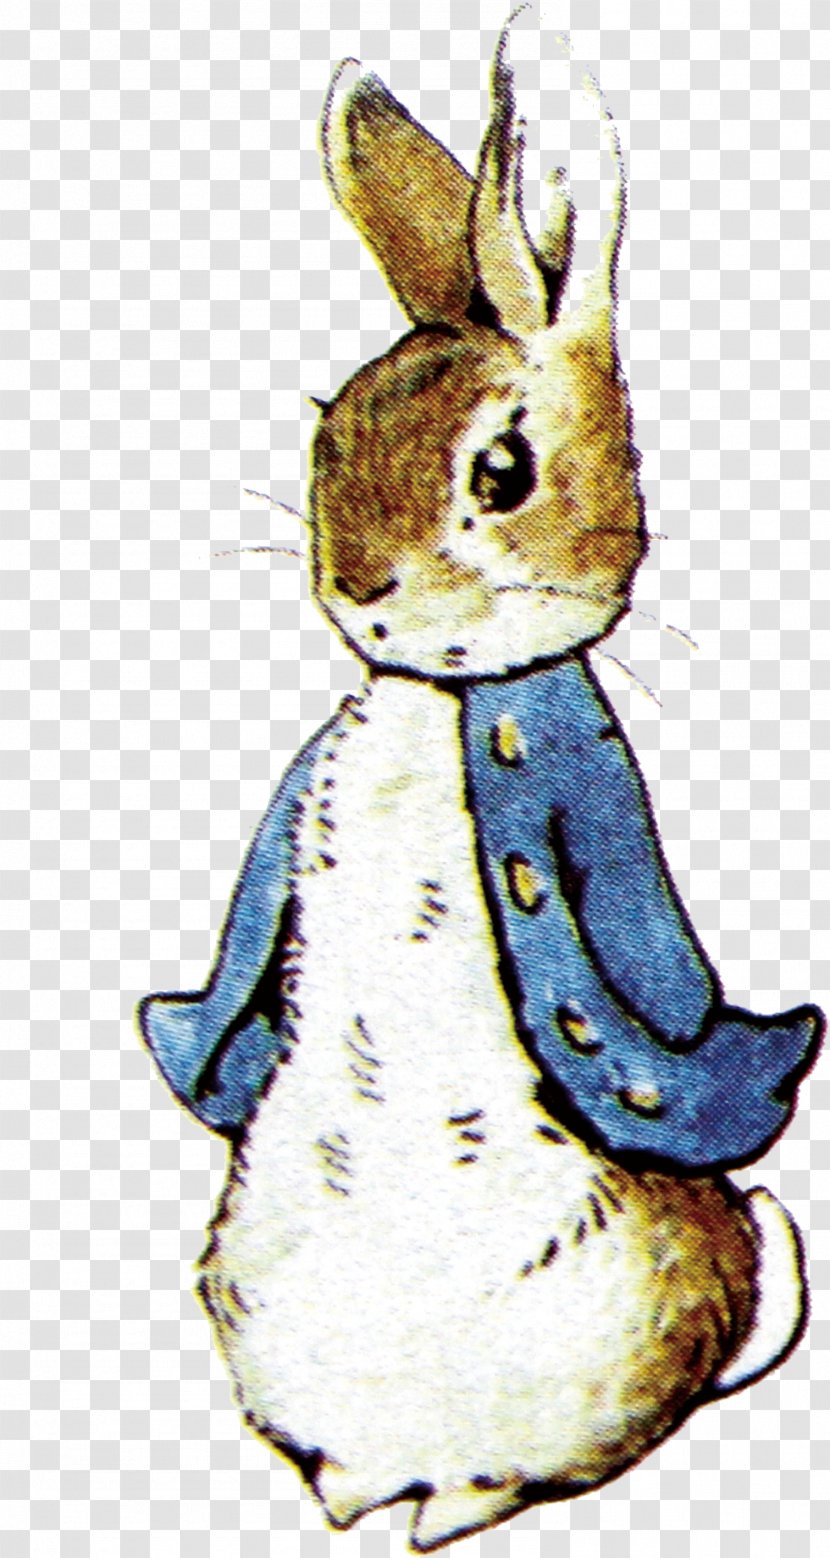 The Tale Of Peter Rabbit Illustration - Rabits And Hares Transparent PNG